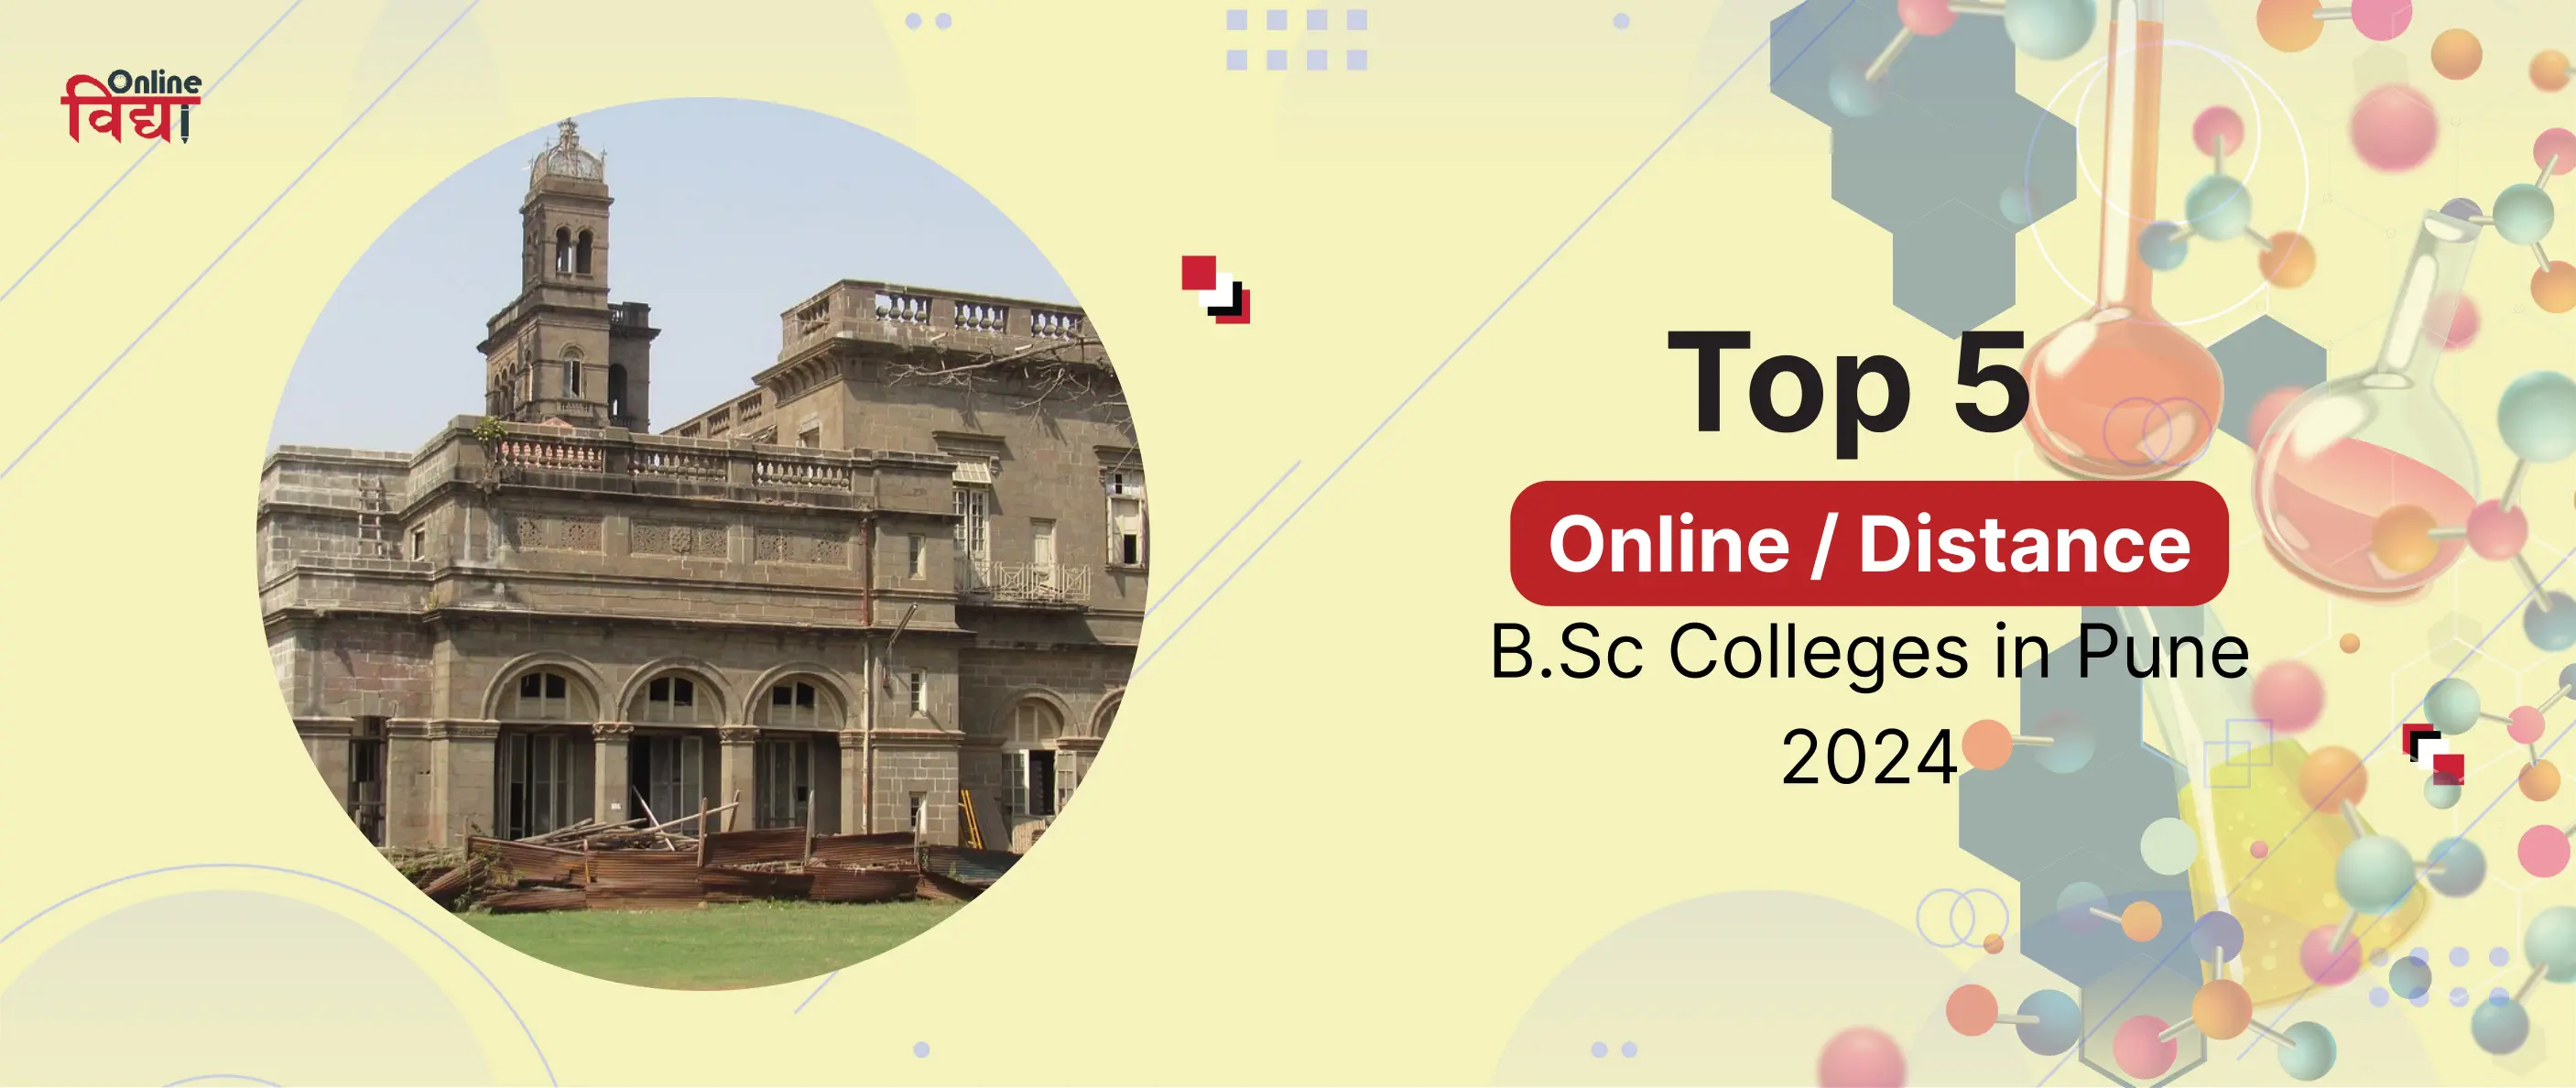 Top 5 Online/ Distance B.Sc Colleges in Pune 2024